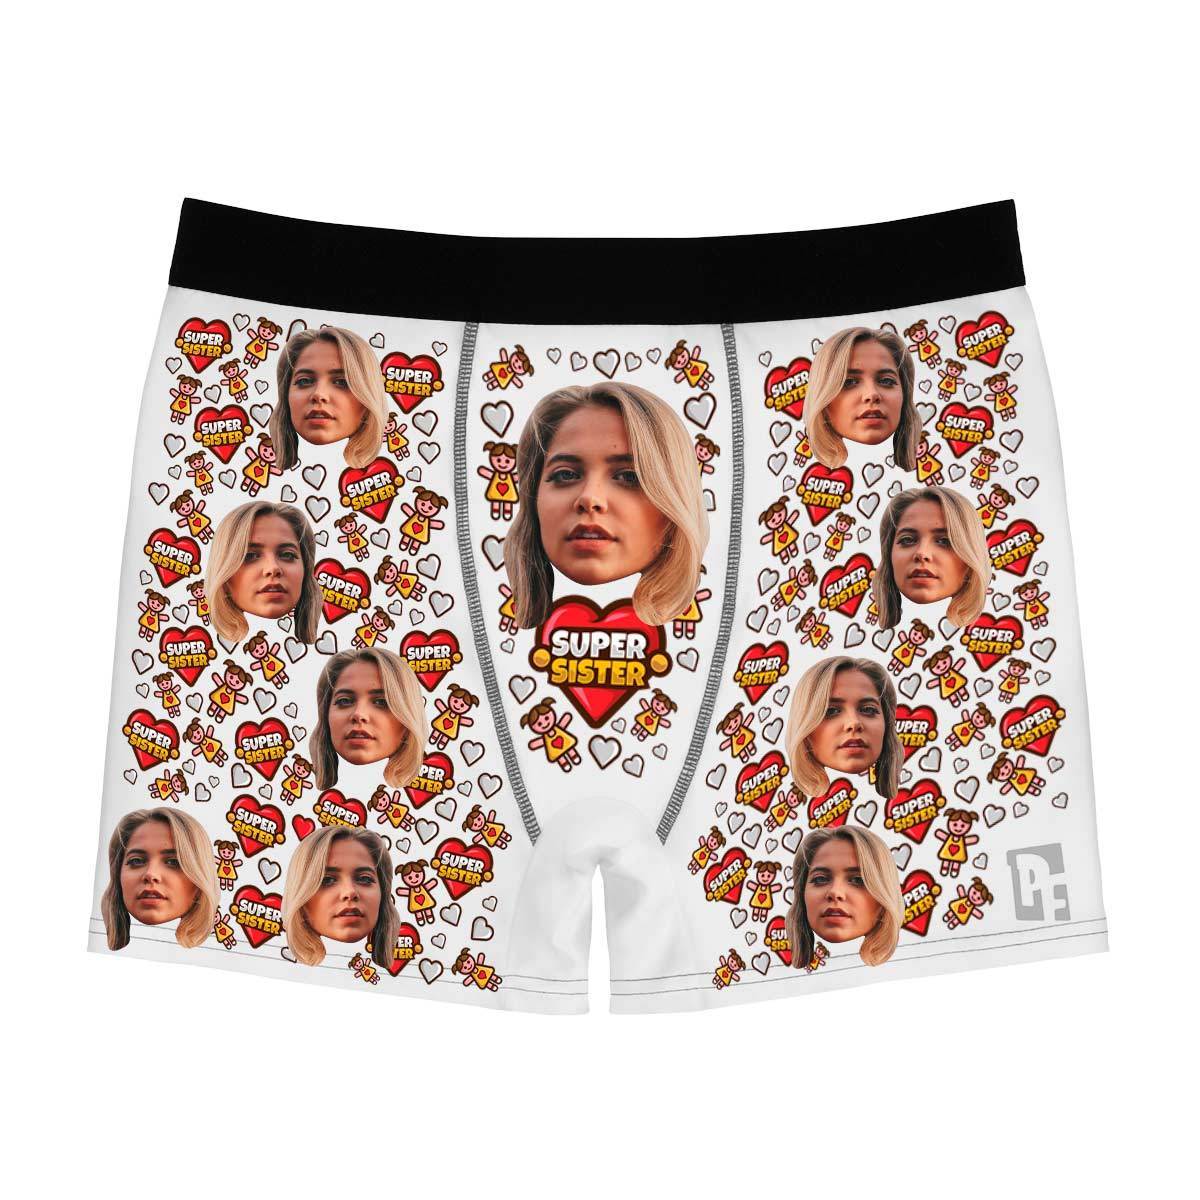 Red Super Sister men's boxer briefs personalized with photo printed on them